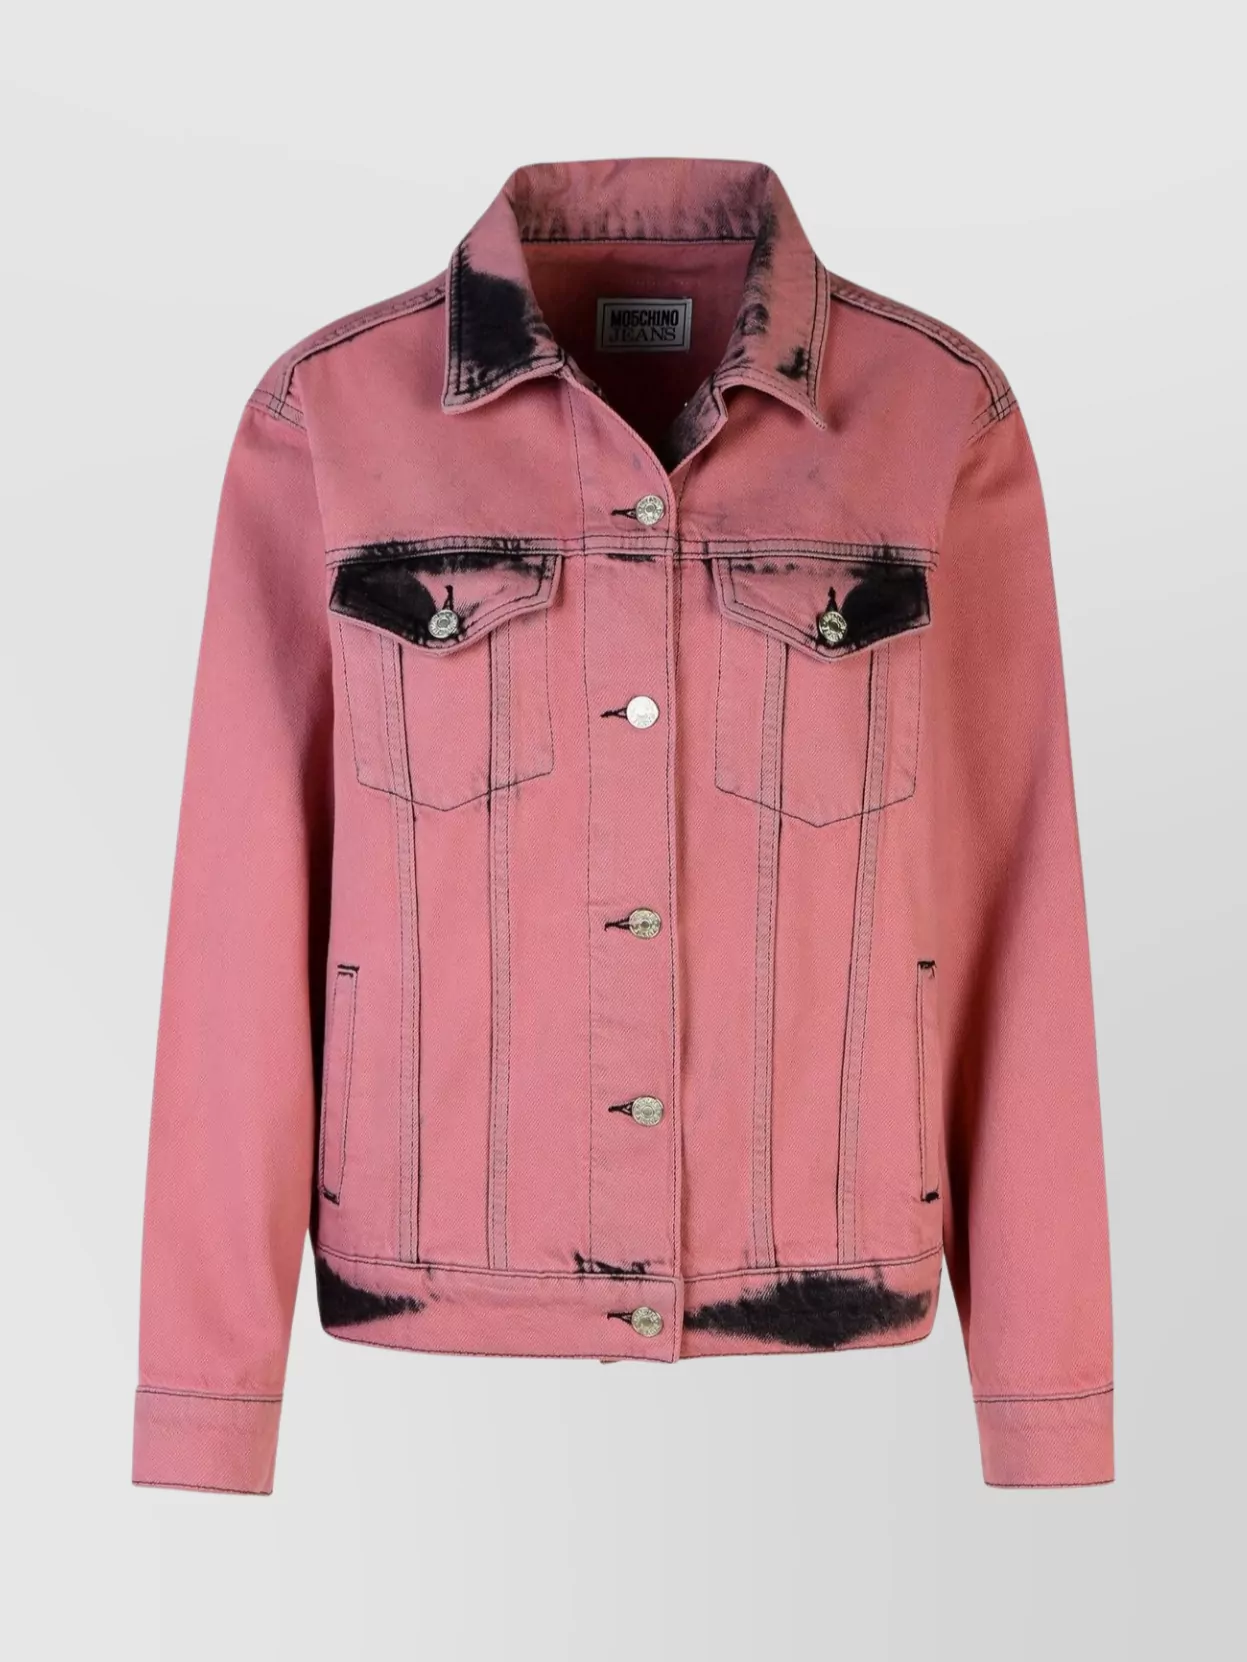 Moschino Cotton Jeans Jacket Featuring Adjustable Waist In Pink